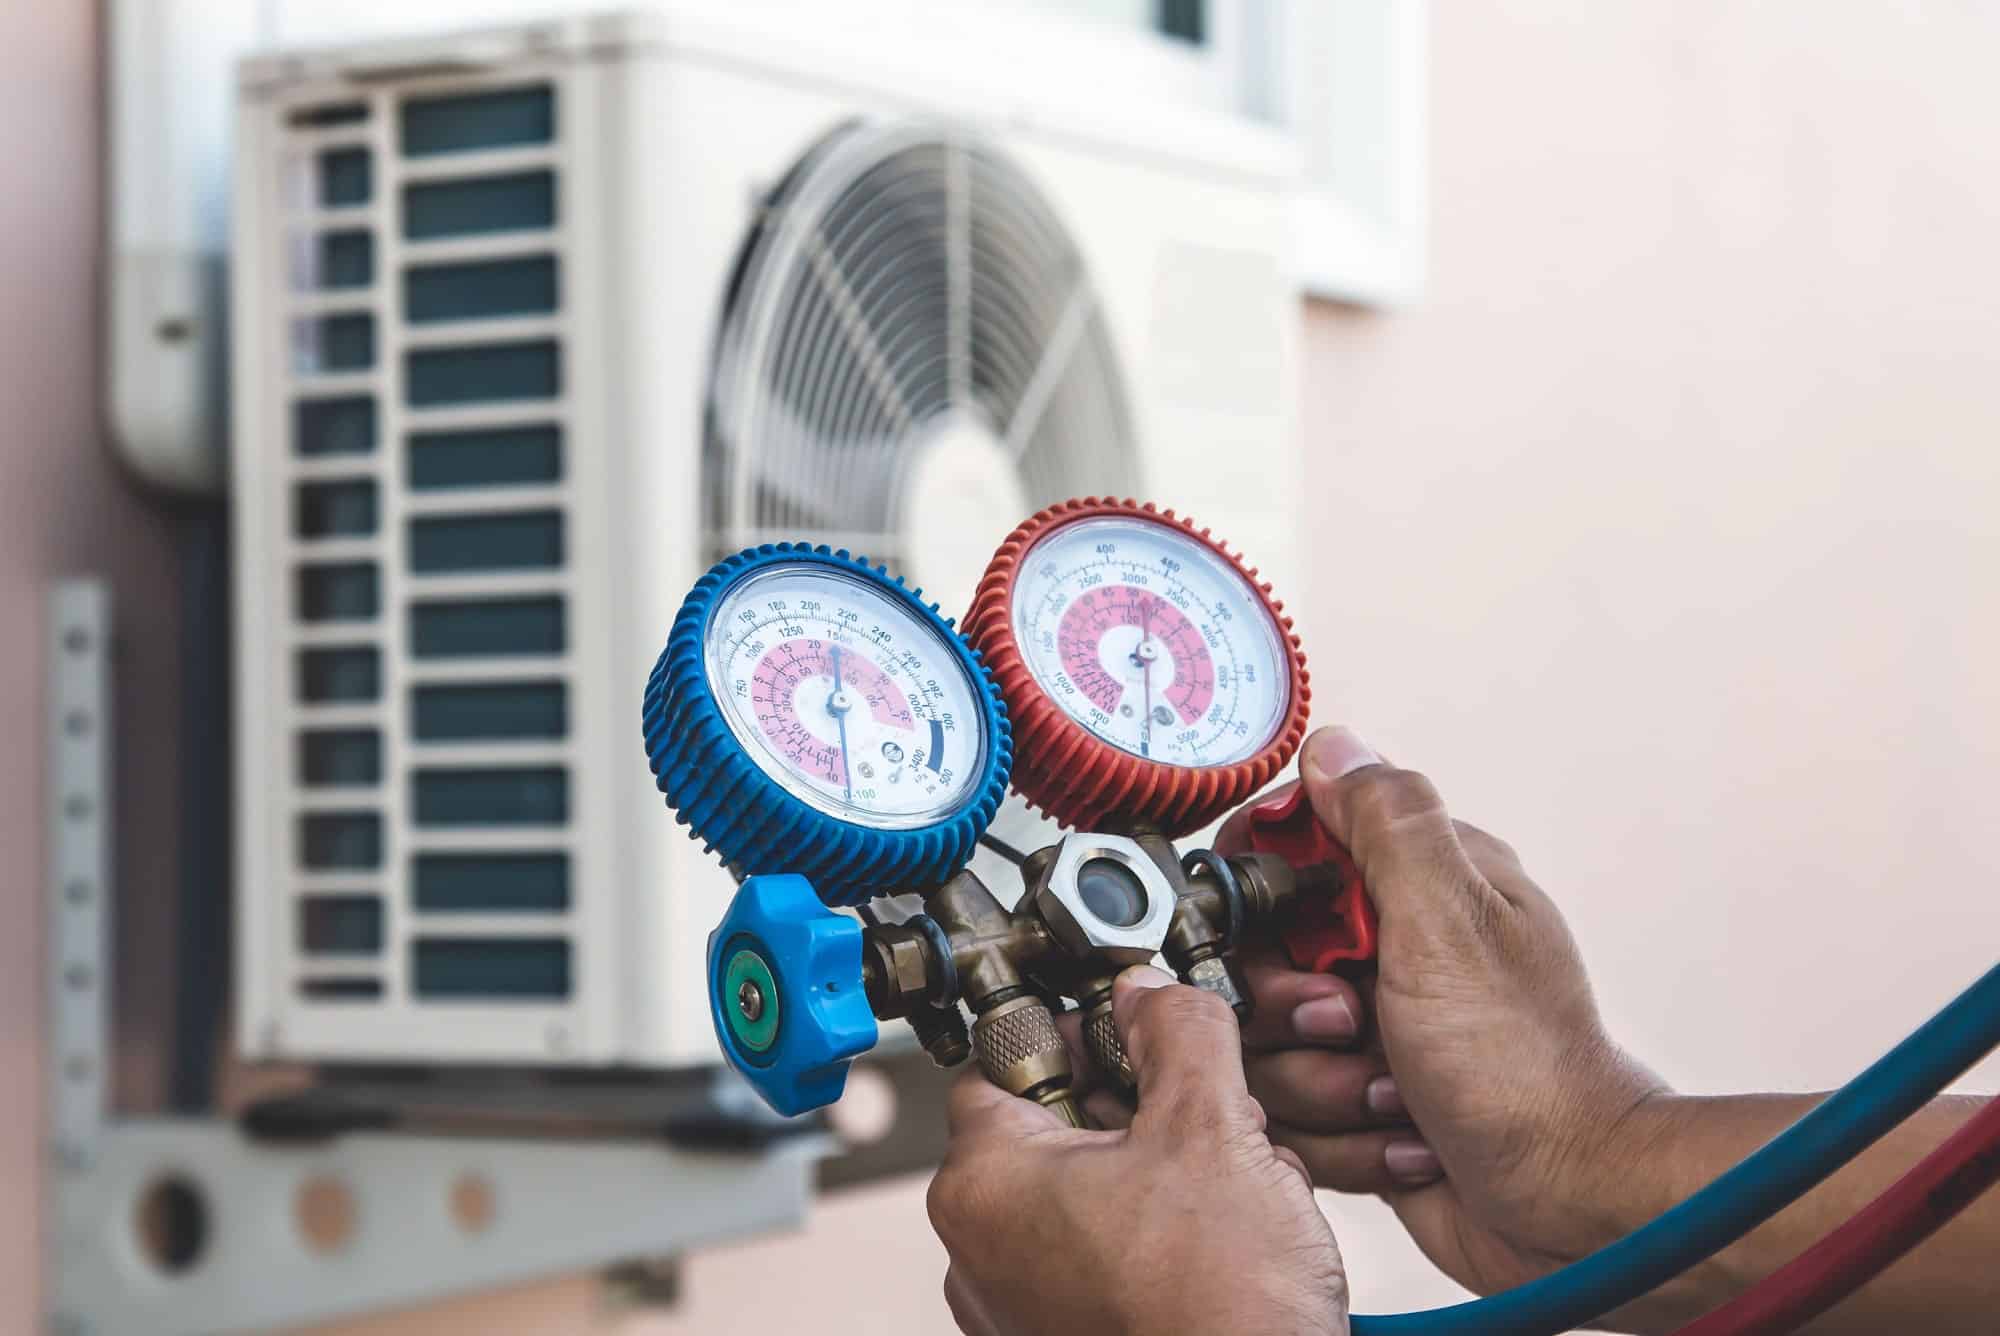 Heat pump installation and maintenance from Service Plus Heating and Cooling Staff